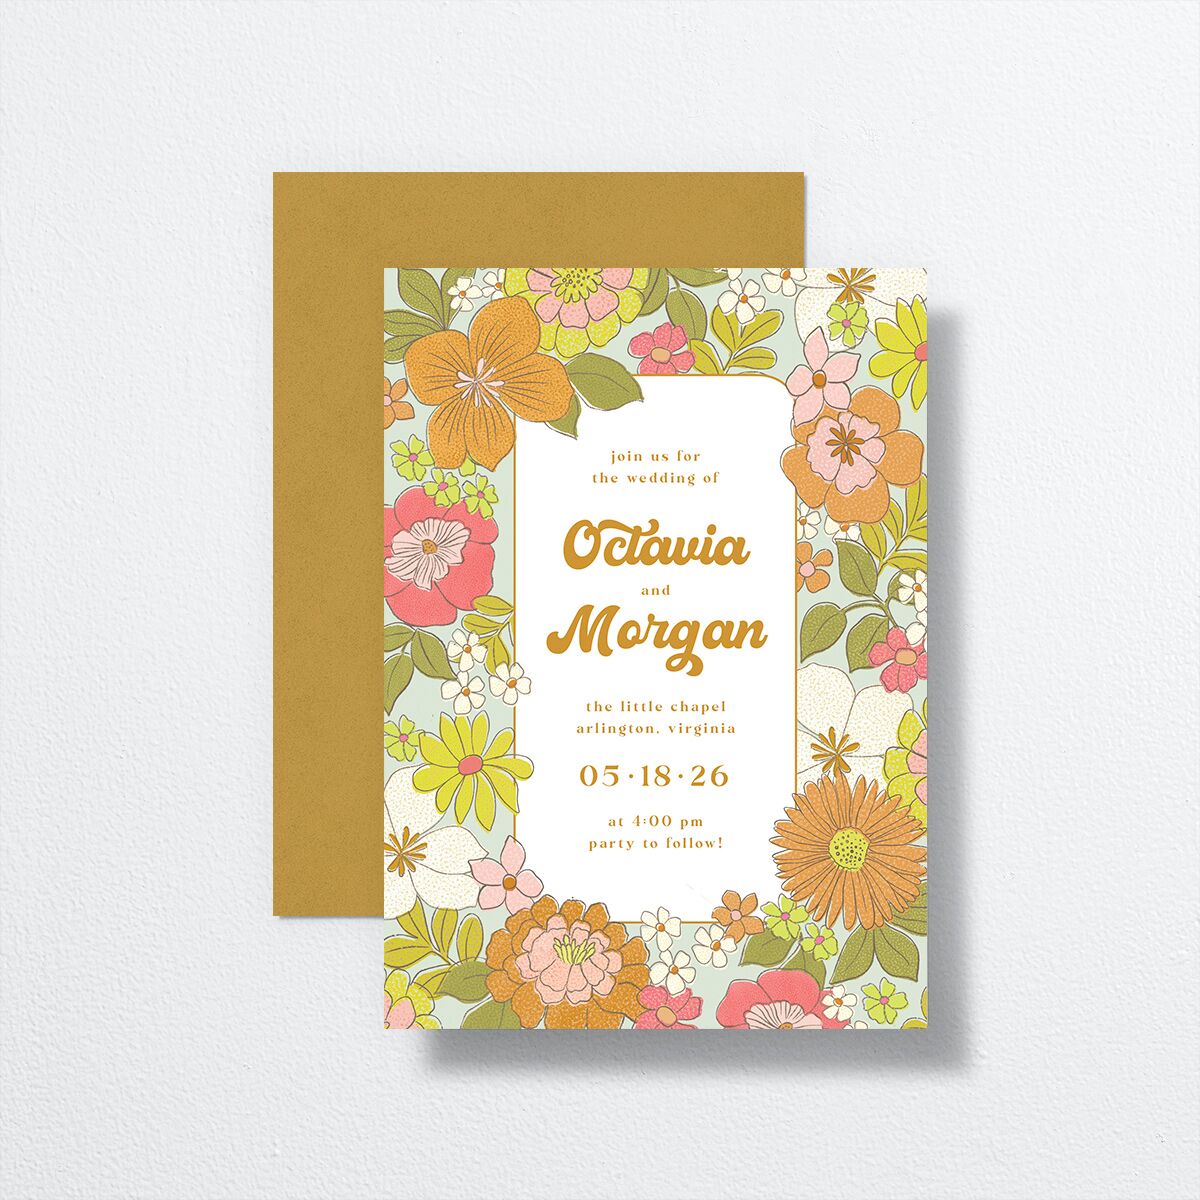 Groovy Blooms Wedding Invitations front-and-back